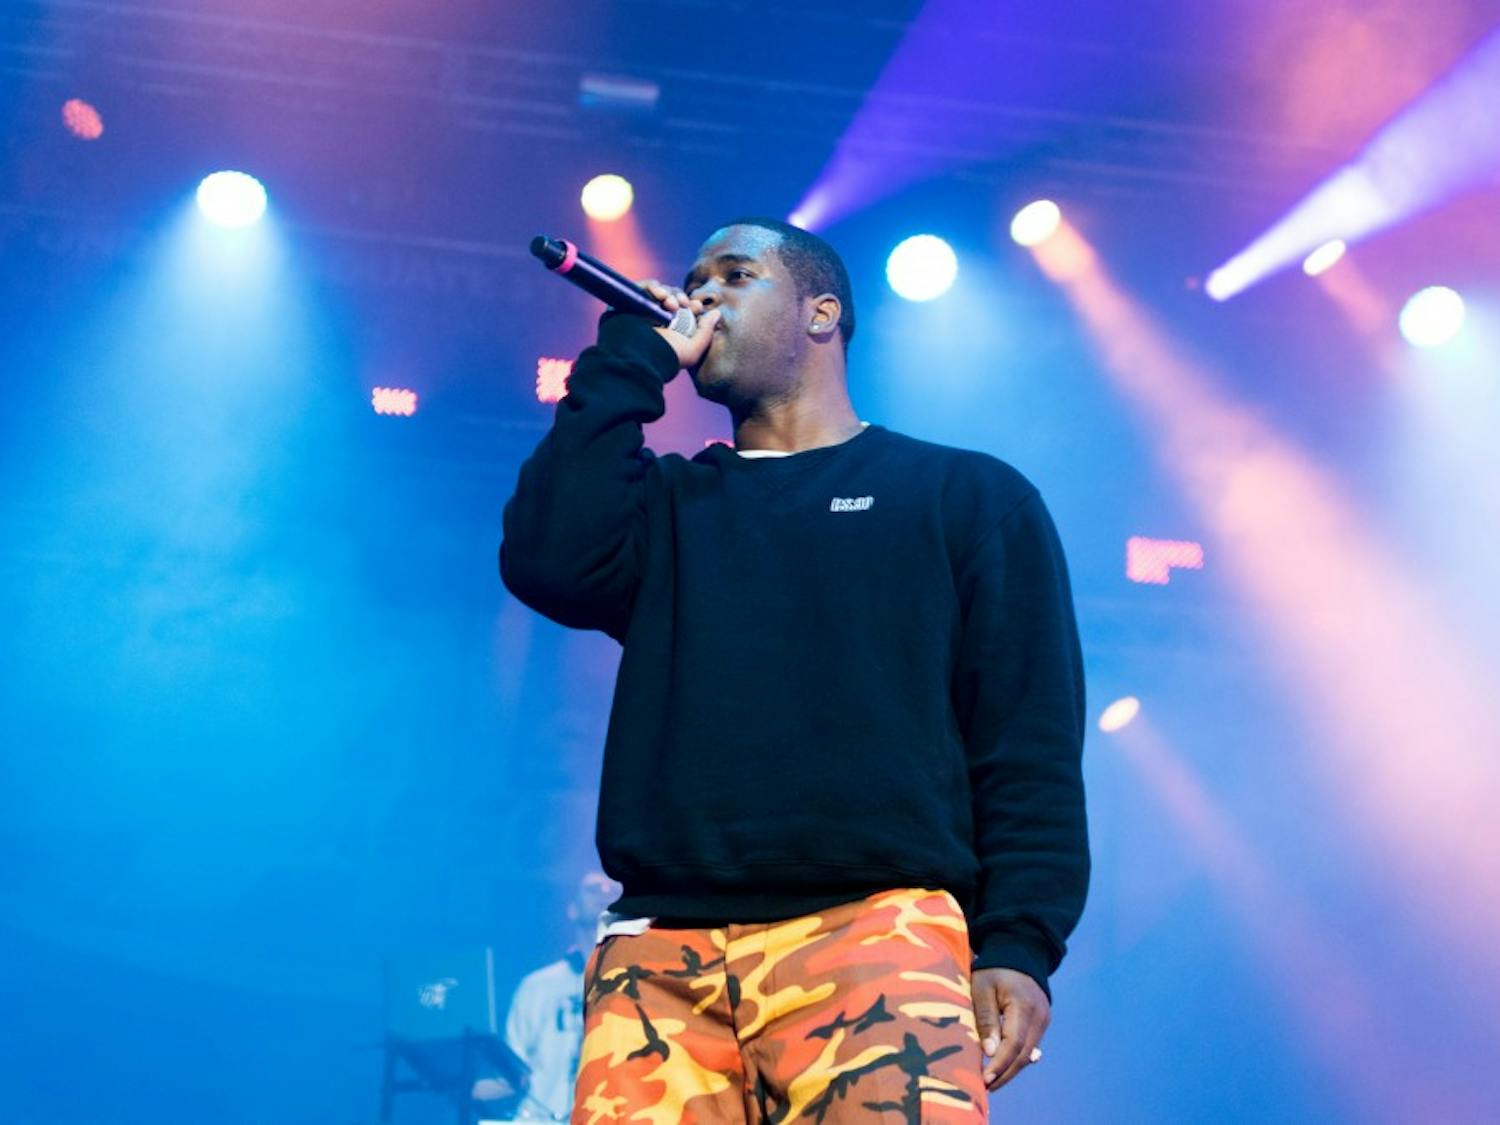 A$AP Ferg, Ty Dolla $ign and Daniel Caesar brought a diverse mix of genres to this year’s Spring Fest, providing sets consisting of rap, trap and soul that energized Alumni Arena from start to finish.